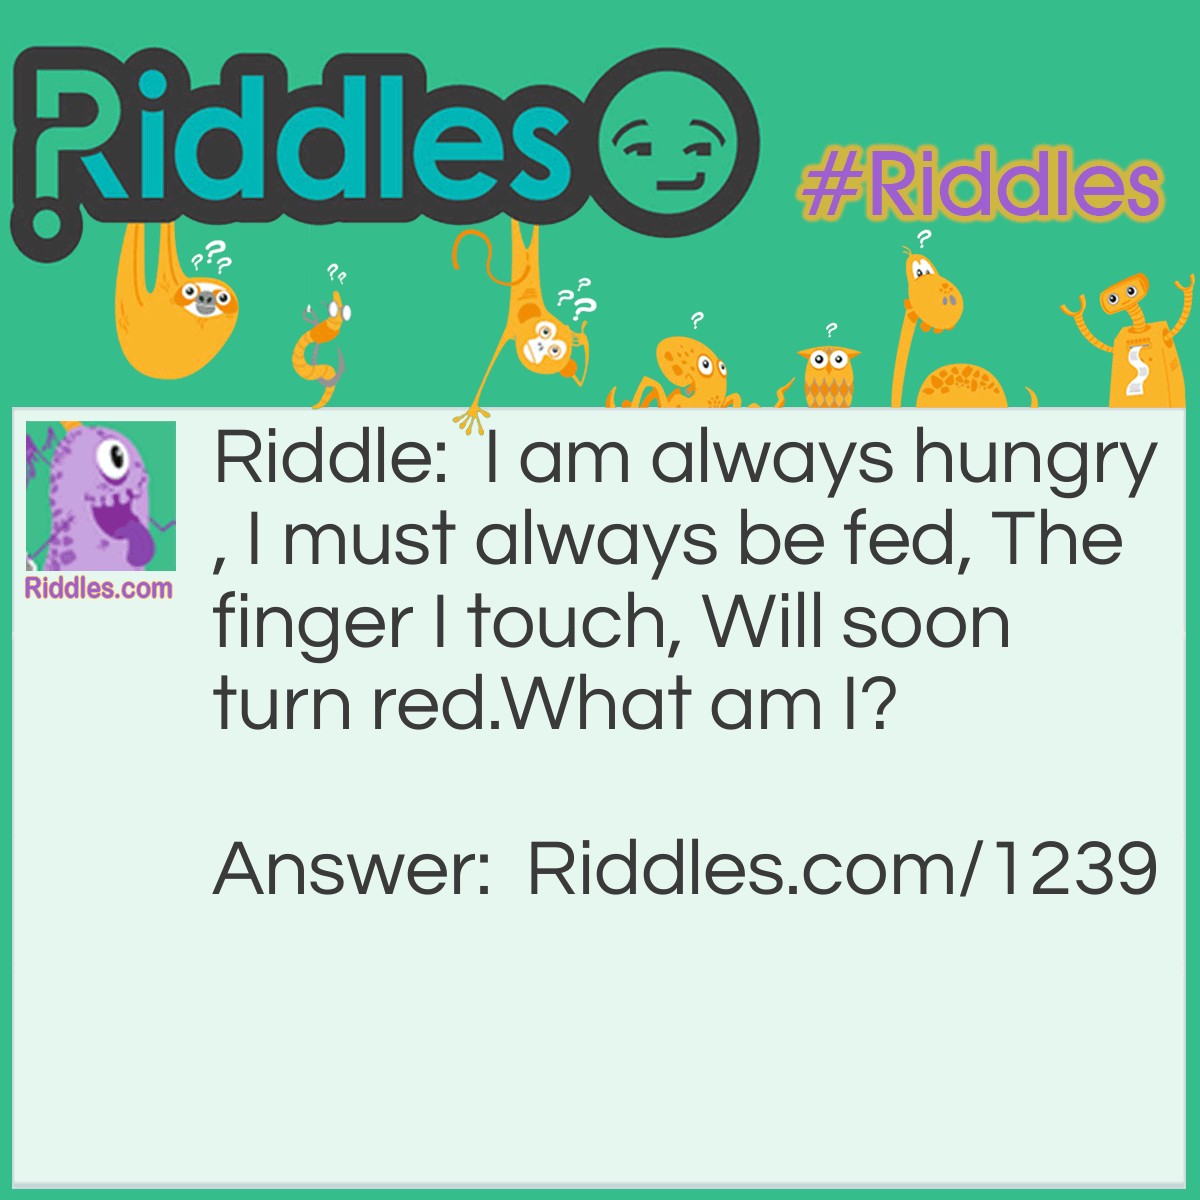 Riddle: I am always hungry, I must always be fed, The finger I touch, Will soon turn red.
What am I? Answer: Fire